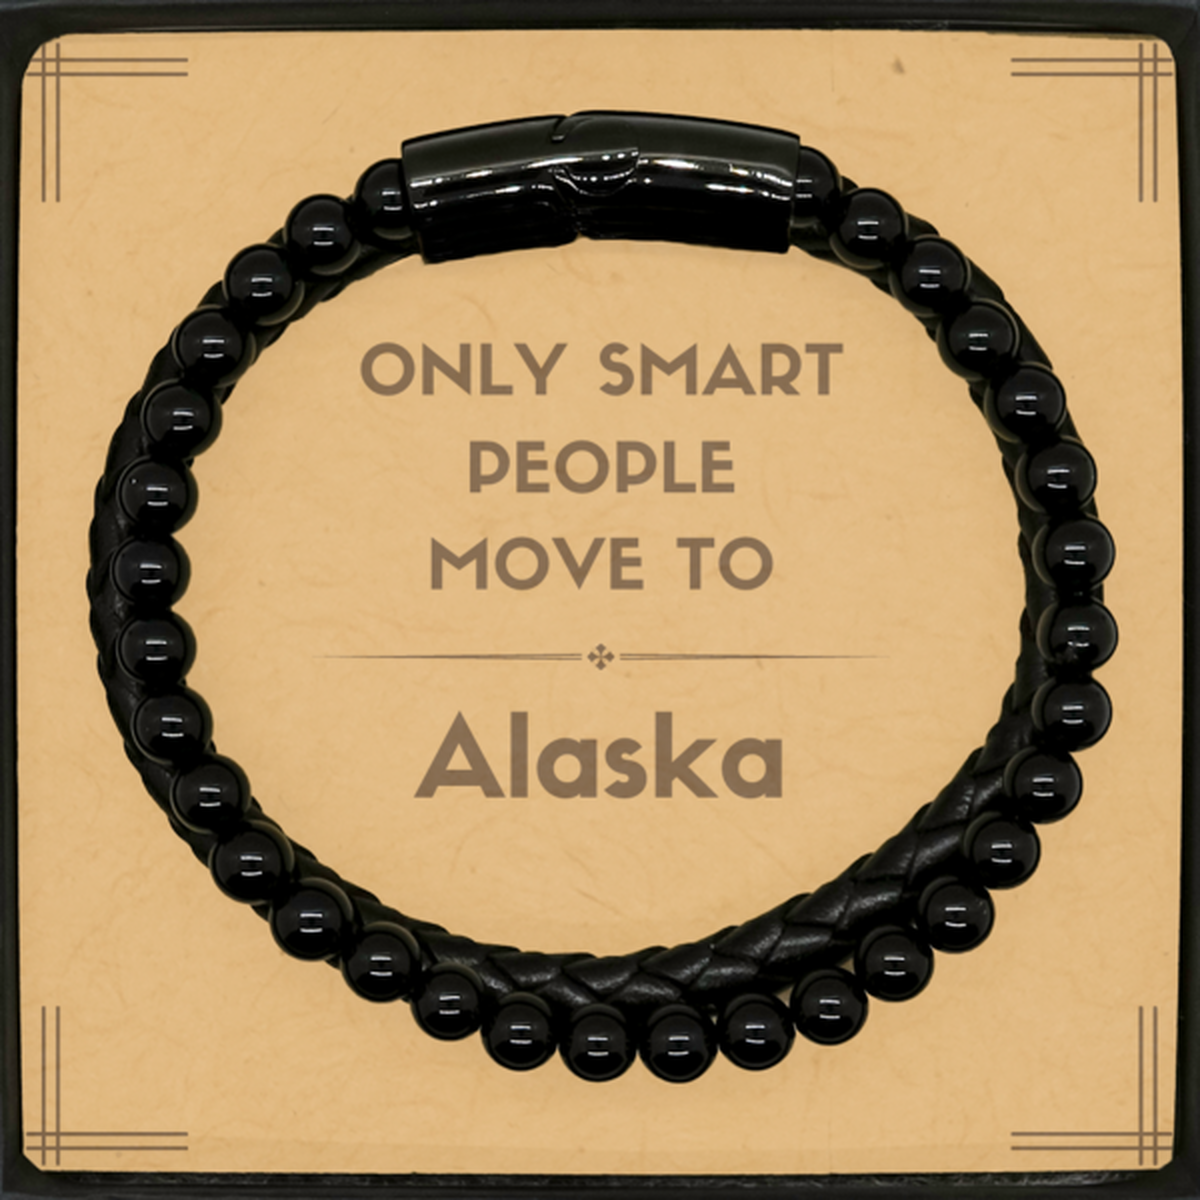 Only smart people move to Alaska Stone Leather Bracelets, Message Card Gifts For Alaska, Move to Alaska Gifts for Friends Coworker Funny Saying Quote